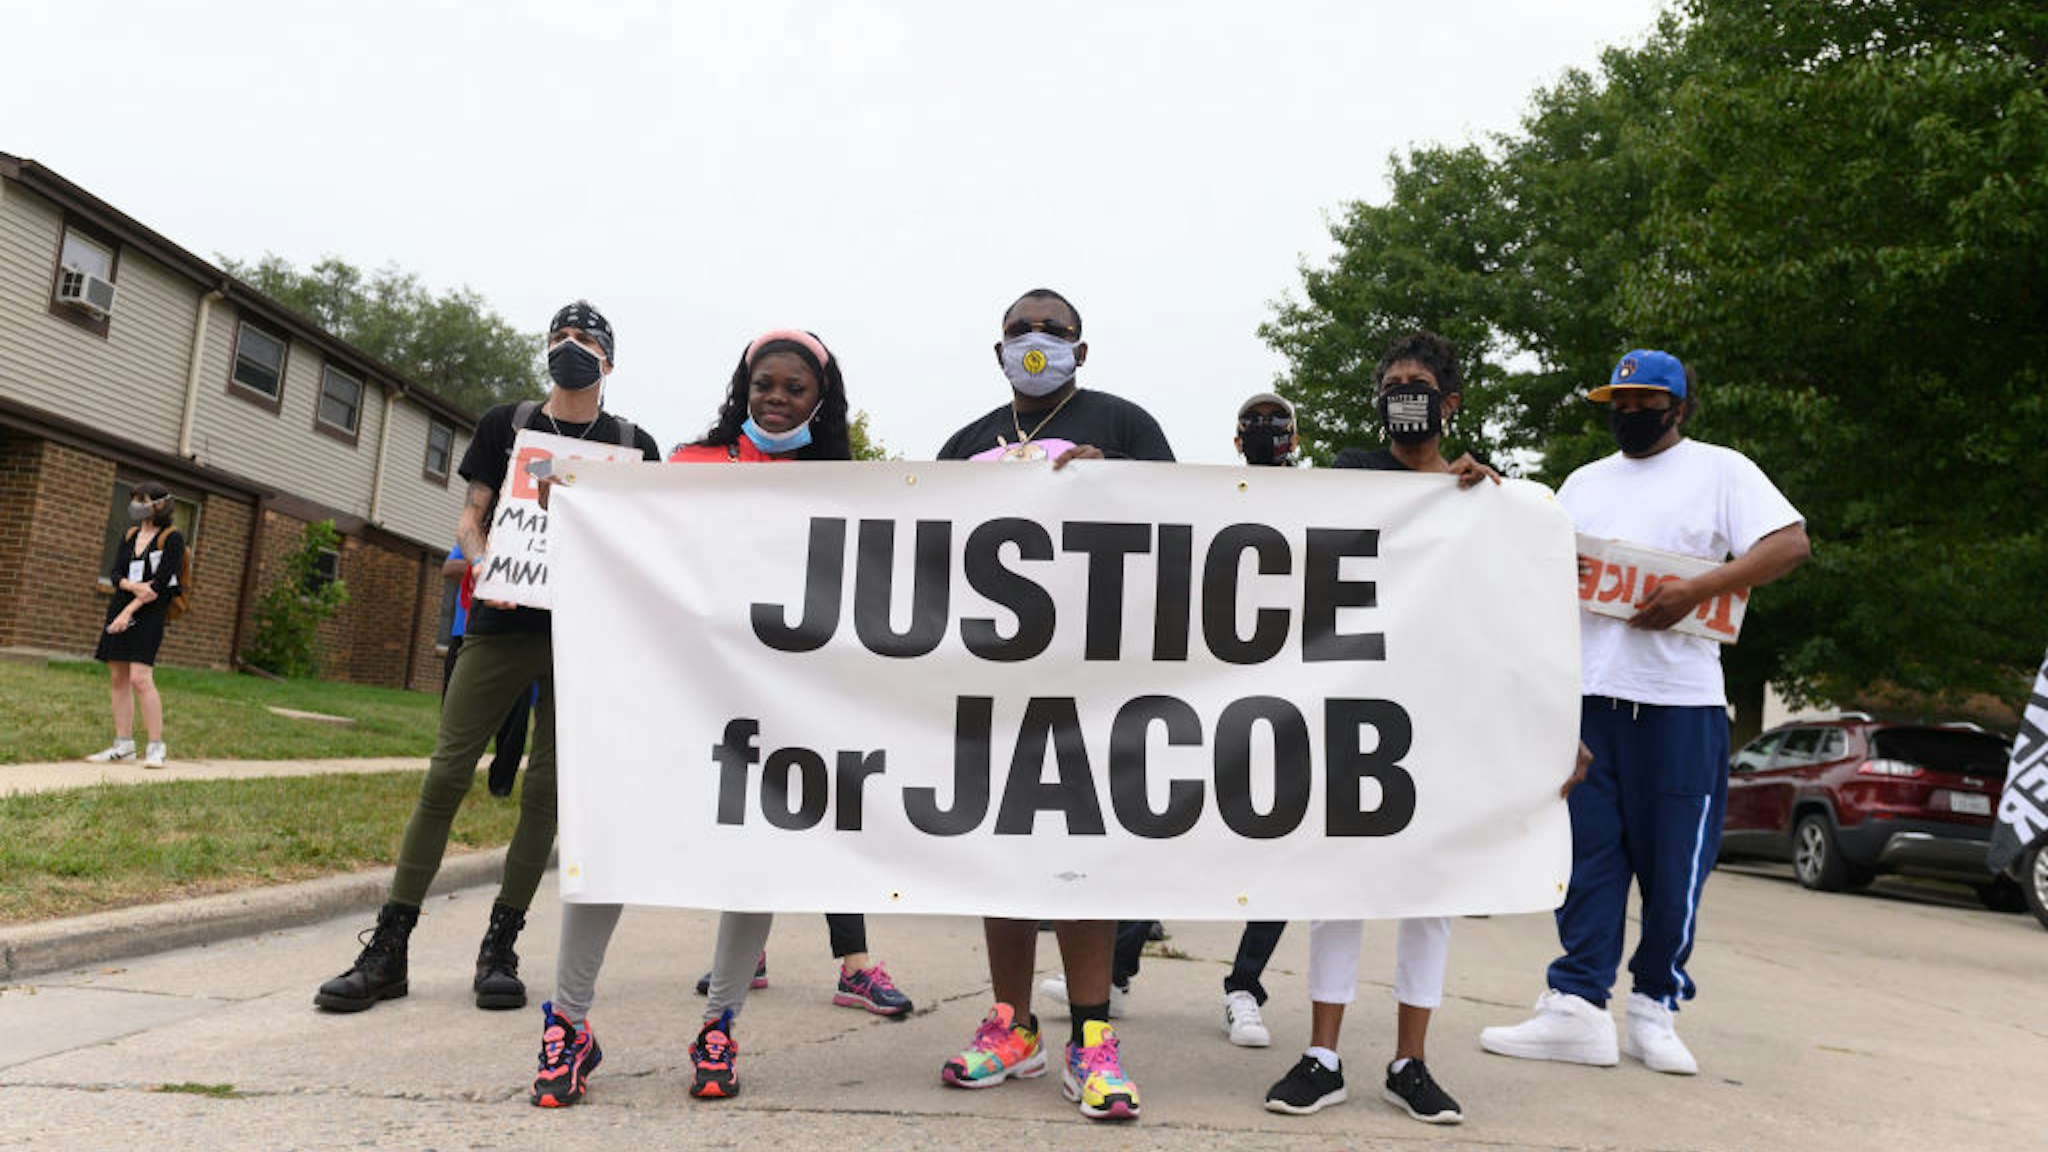 Protesters hold a banner during a community celebration and call for justice for Jacob Blake as grassroots group MoveOn flies an airplane banner and drives a mobile billboard calling on voters to "Reject Trump's Violence," in response to Donald Trump's visit on September 01, 2020 in Kenosha, Wisconsin.